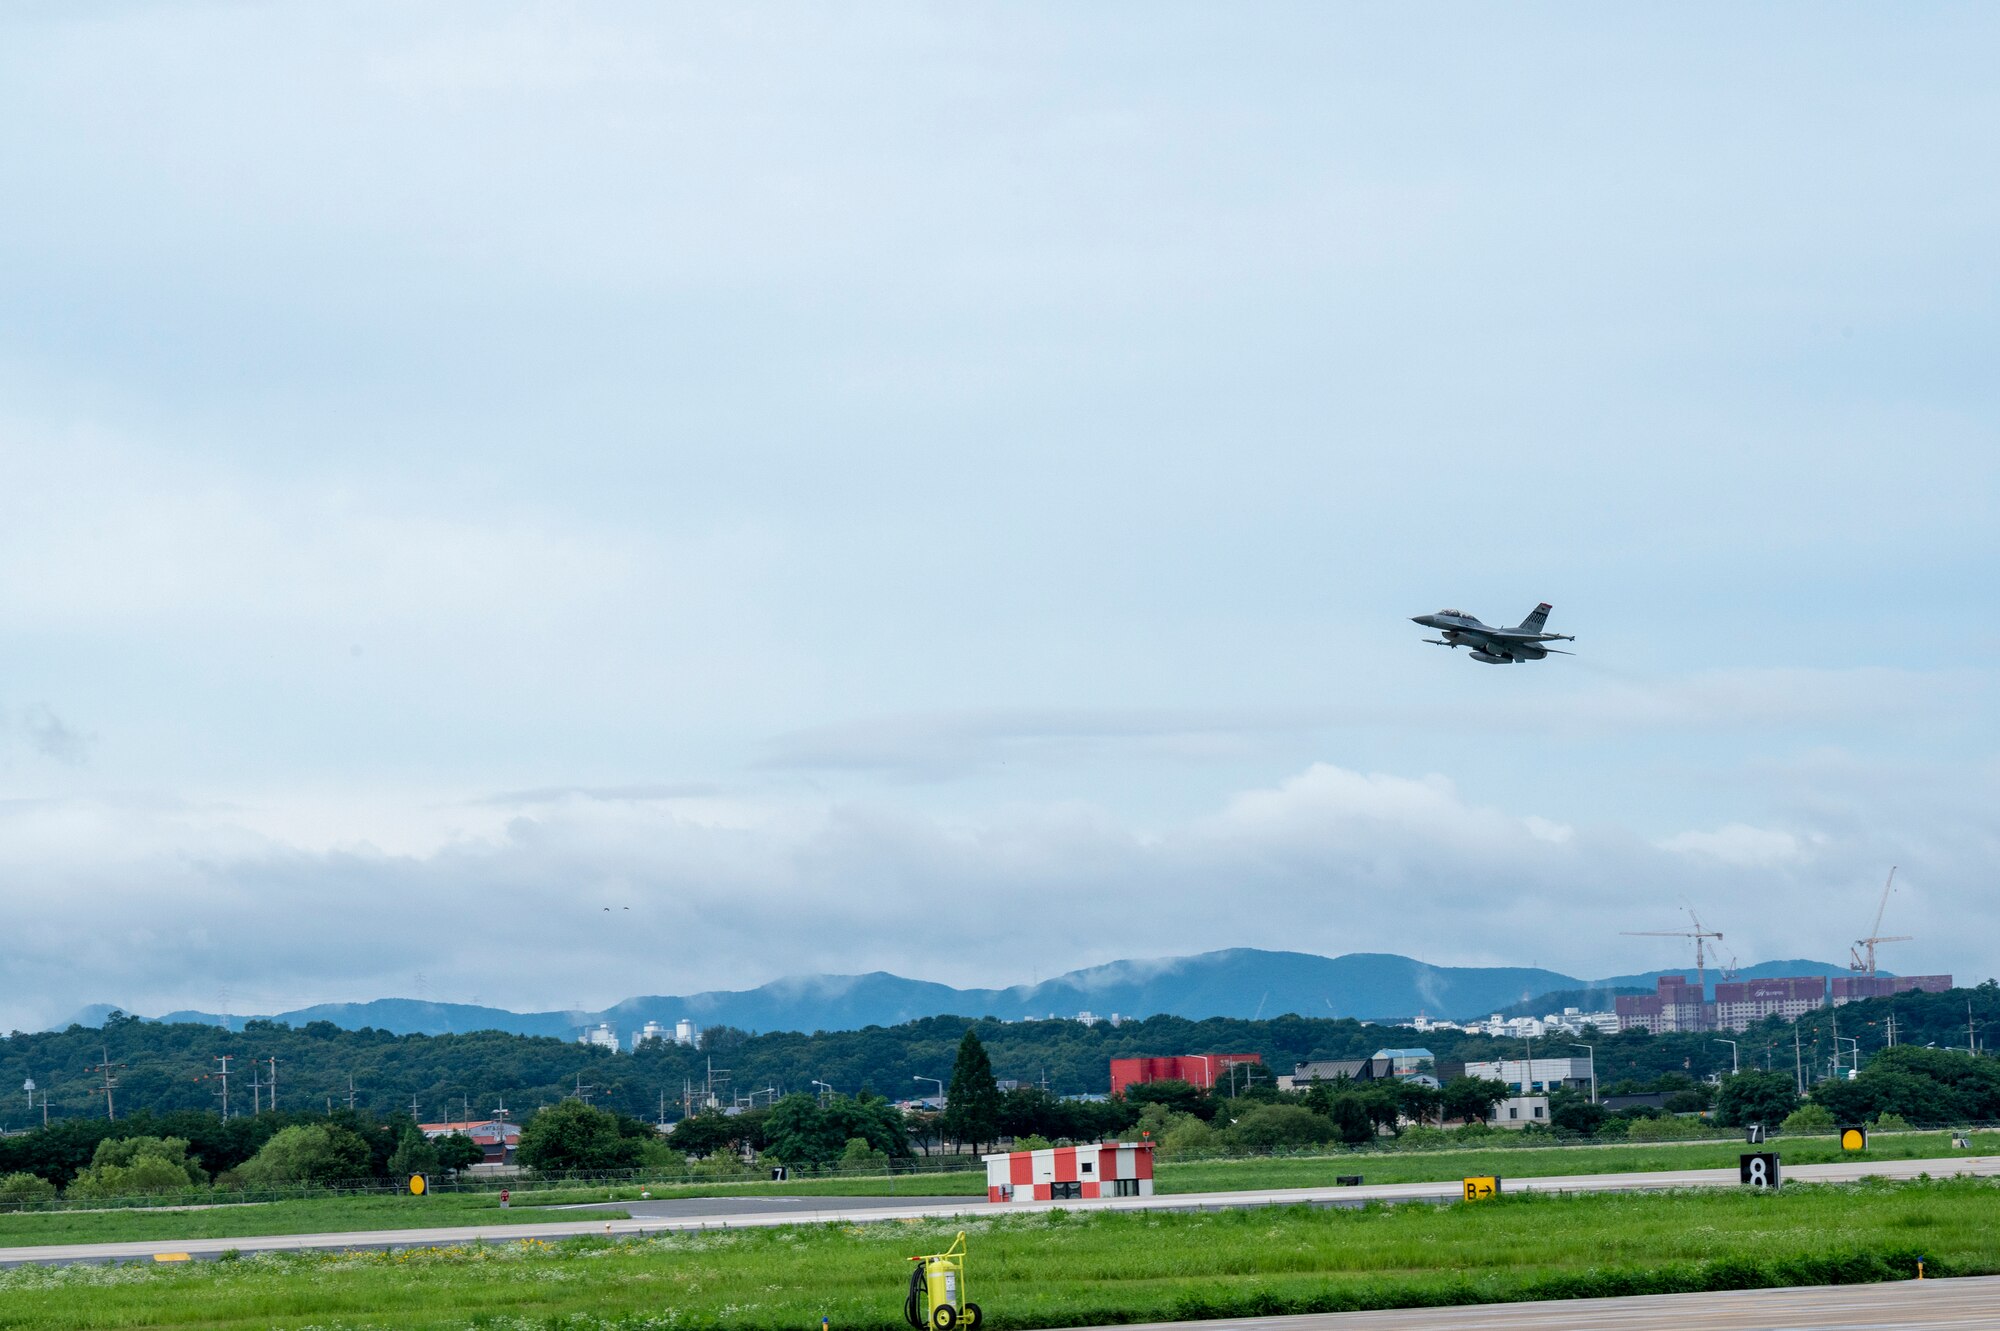 U.S. Air Force Col. William McKibban, 51st Fighter Wing commander, and U.S. Army Command Sgt. Maj. Jack Love, U.S. Forces Korea Senior Enlisted Advisor, take off in an F-16D Fighting Falcon at Osan Air Base, Republic of Korea, July 18, 2023. The D-model is a two-seat variant of the F-16 fighter jet which allows for familiarization flights. (U.S. Air Force photo by Senior Airman Aaron Edwards)